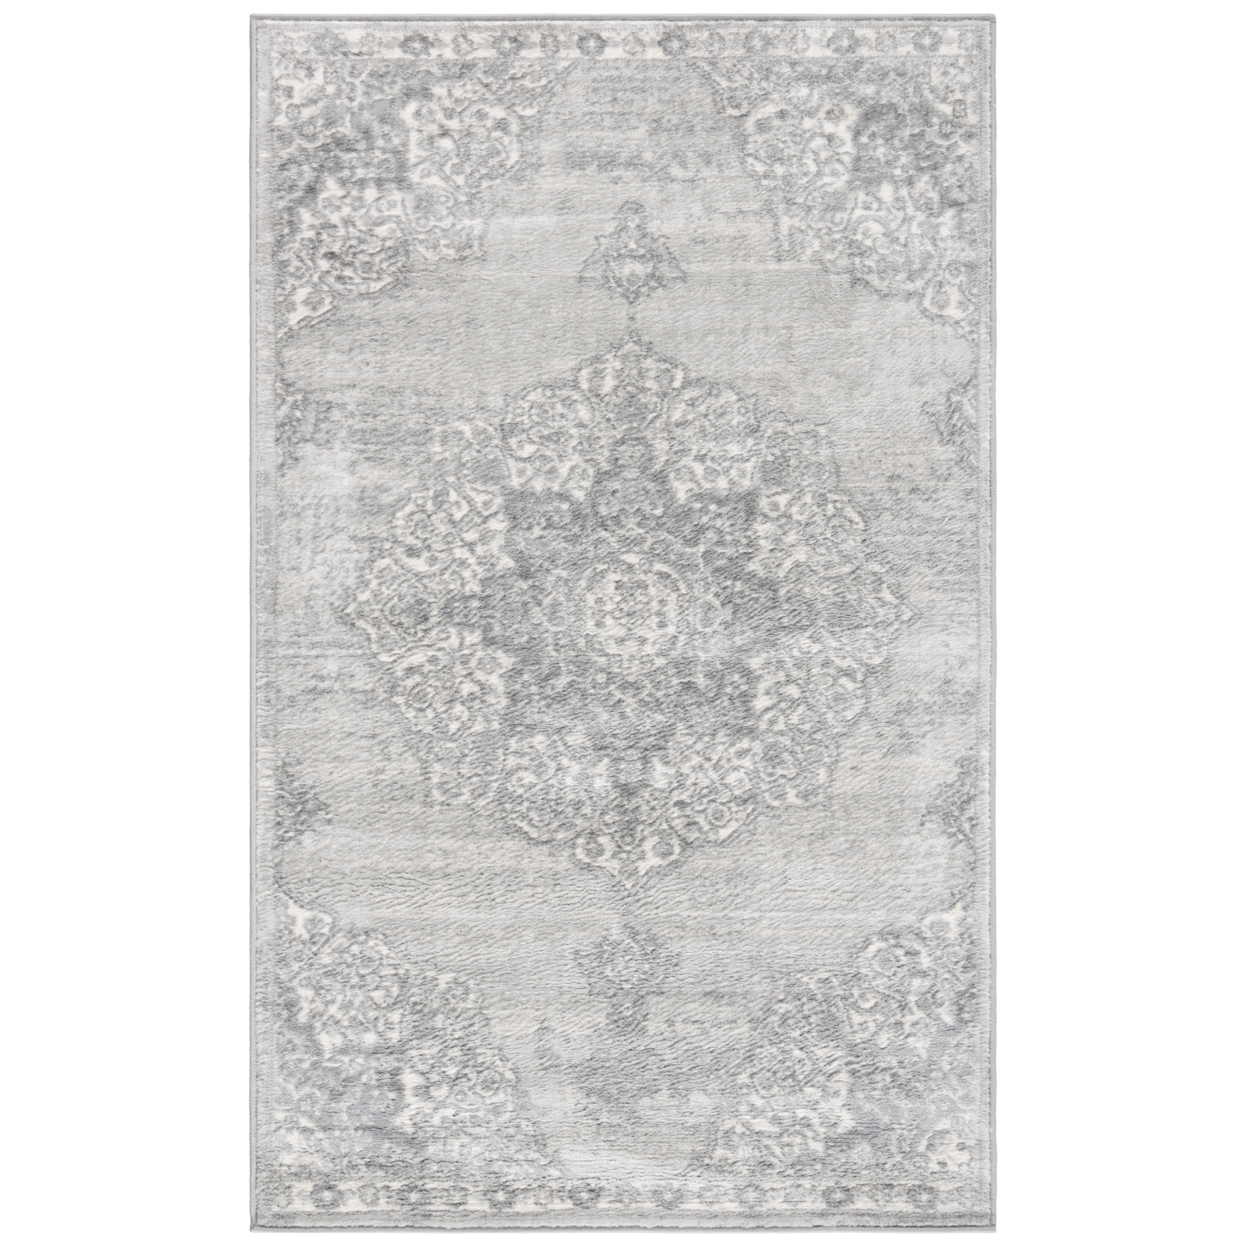 SAFAVIEH Brentwood Collection BNT802F Grey / Ivory Rug - 2' X 18'